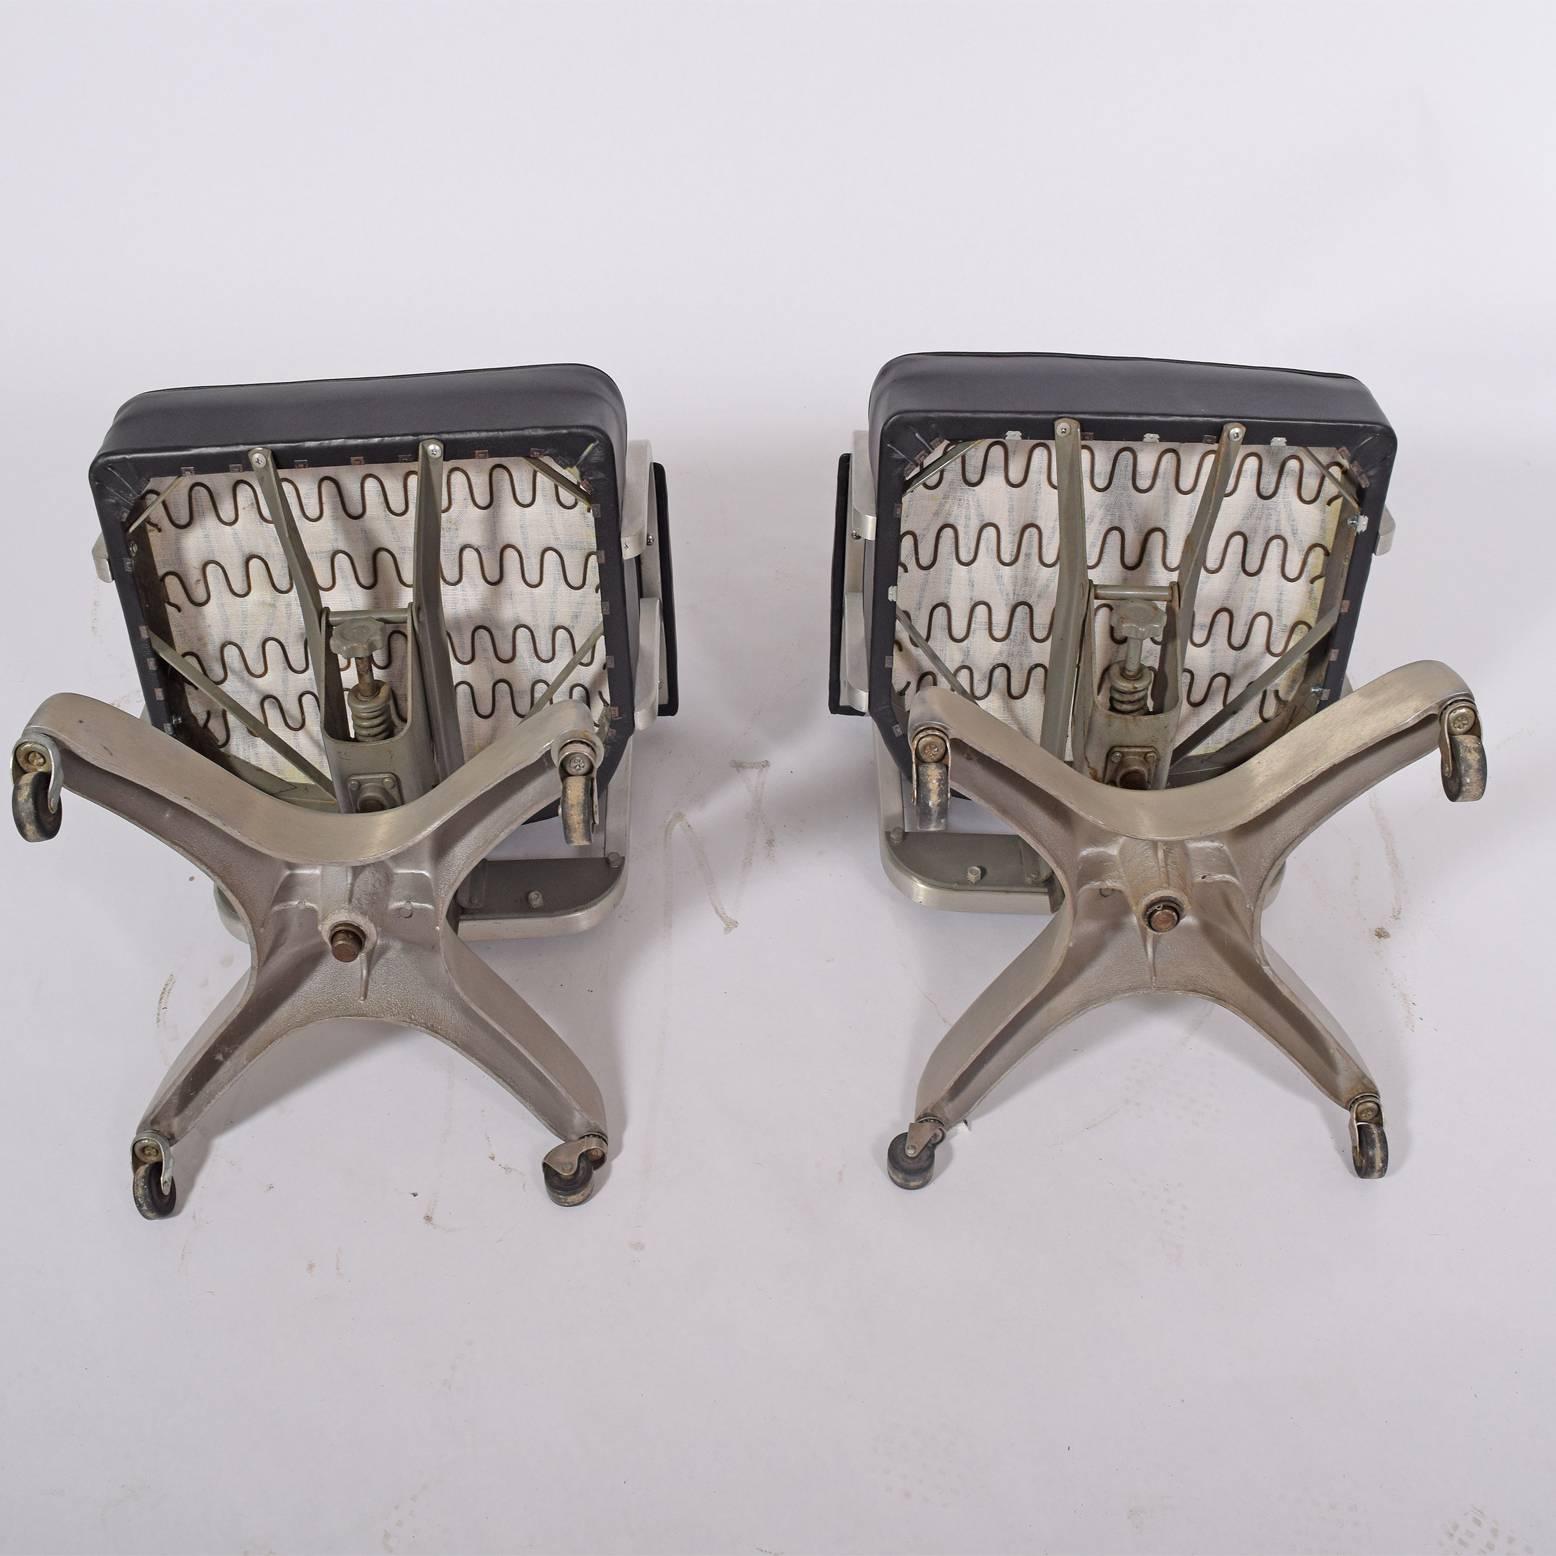 Mid-20th Century Aluminum Office Chairs Made by Emeco Co.